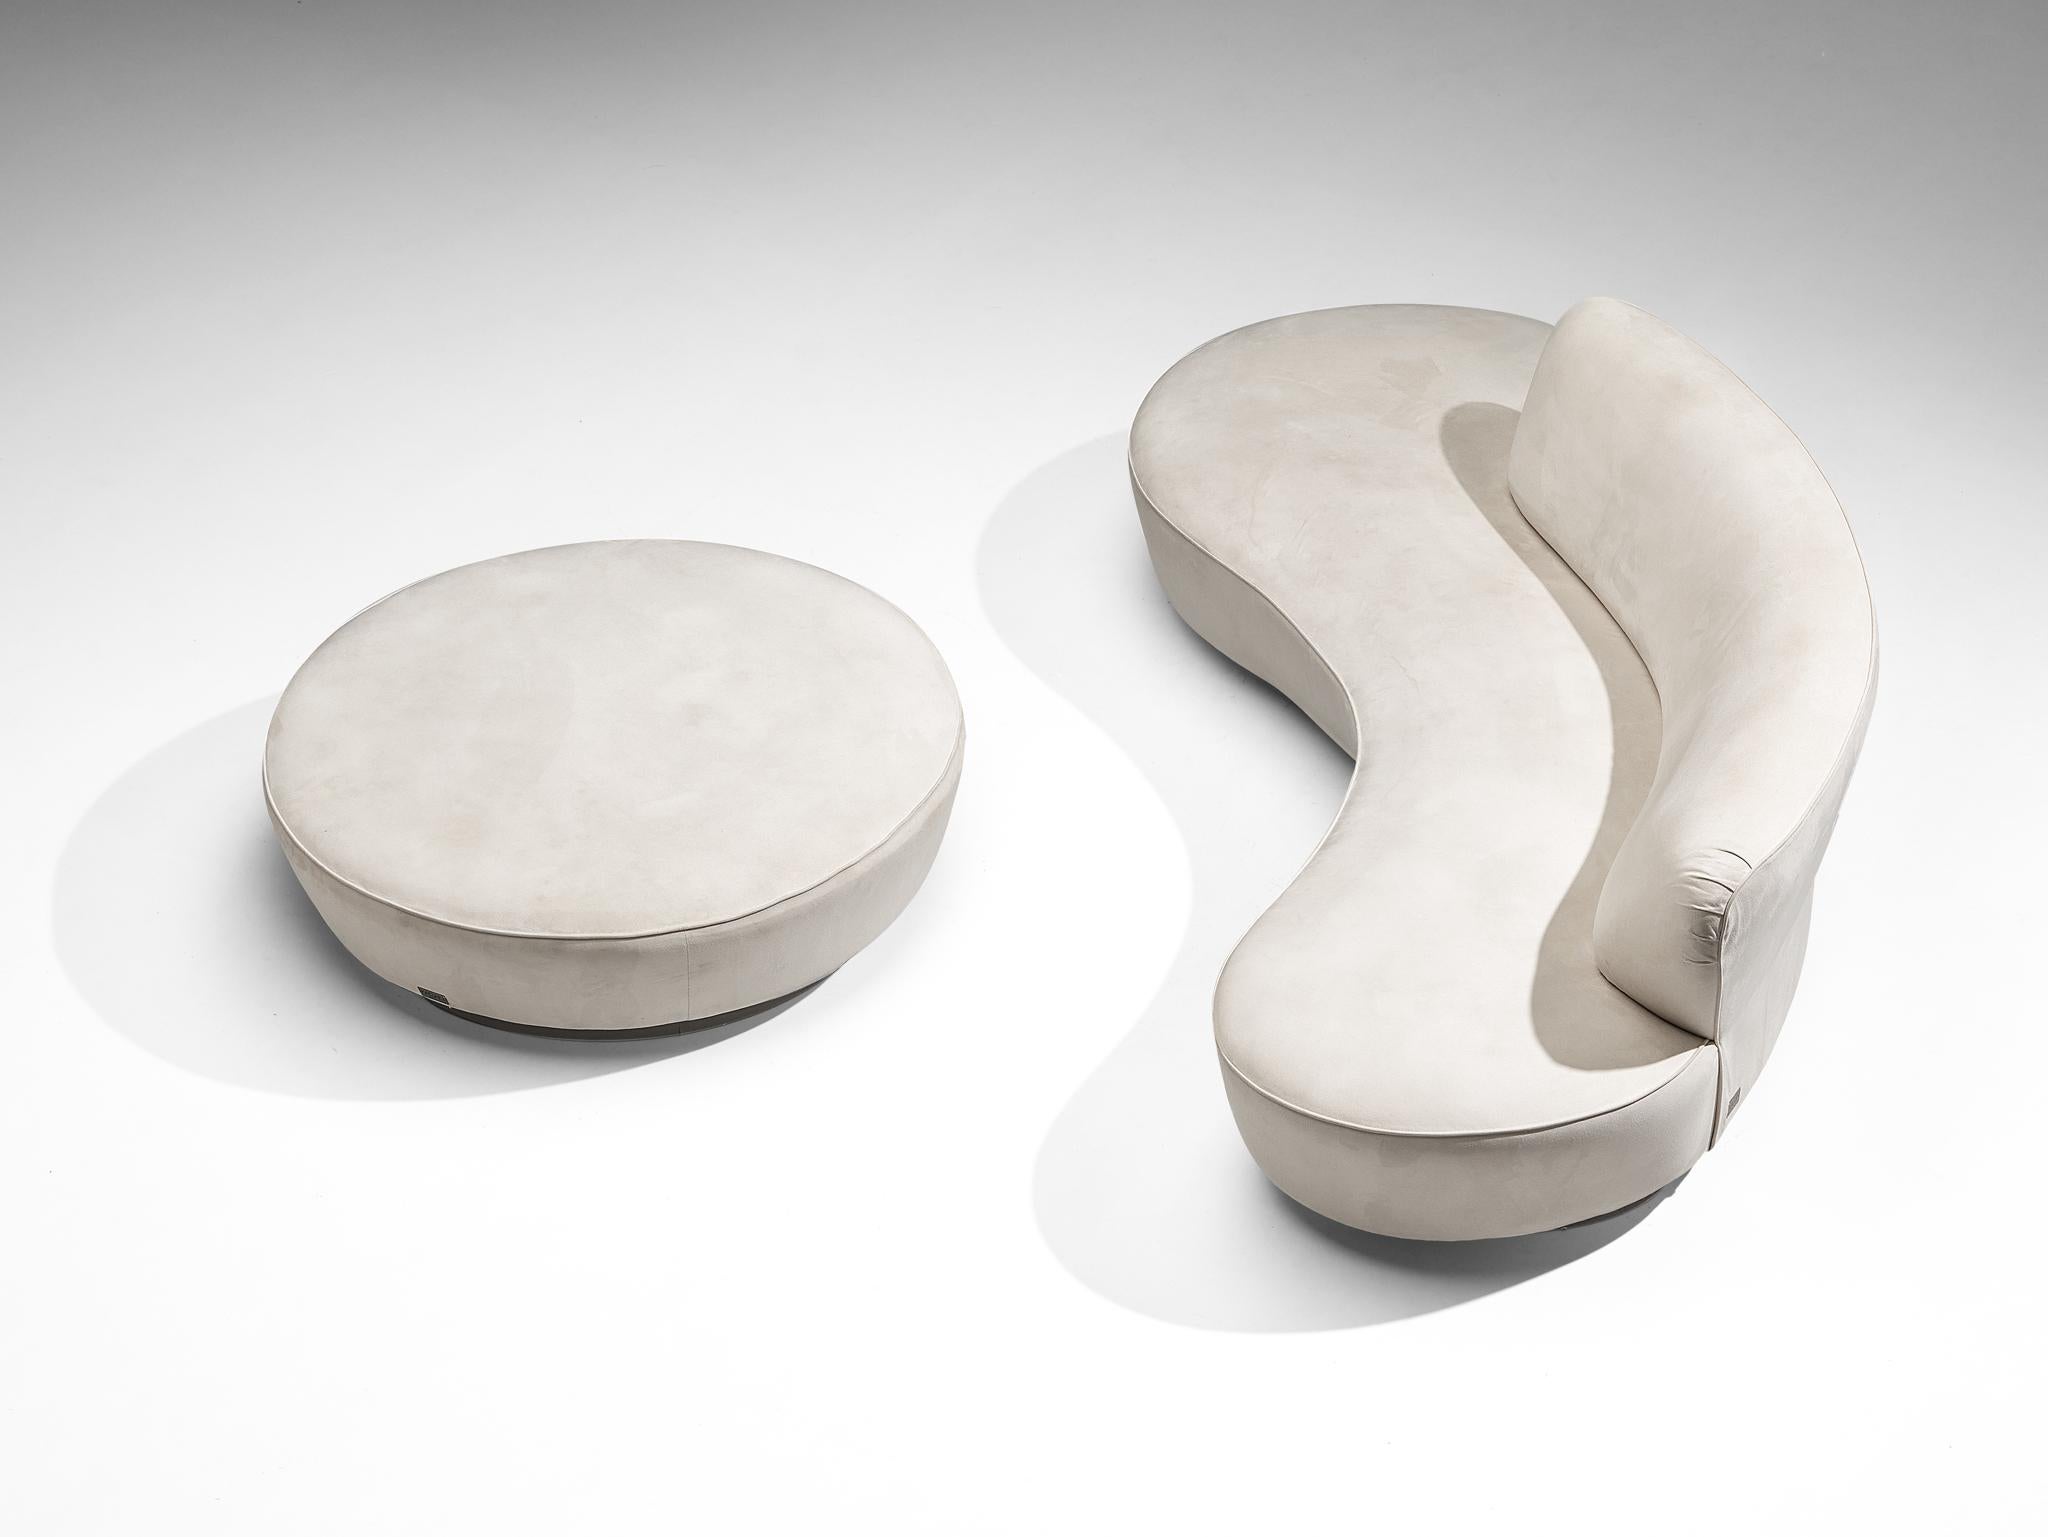 Iconic Vladimir Kagan ‘Serpentine’ Sofa and Ottoman in Off-White Upholstery 4